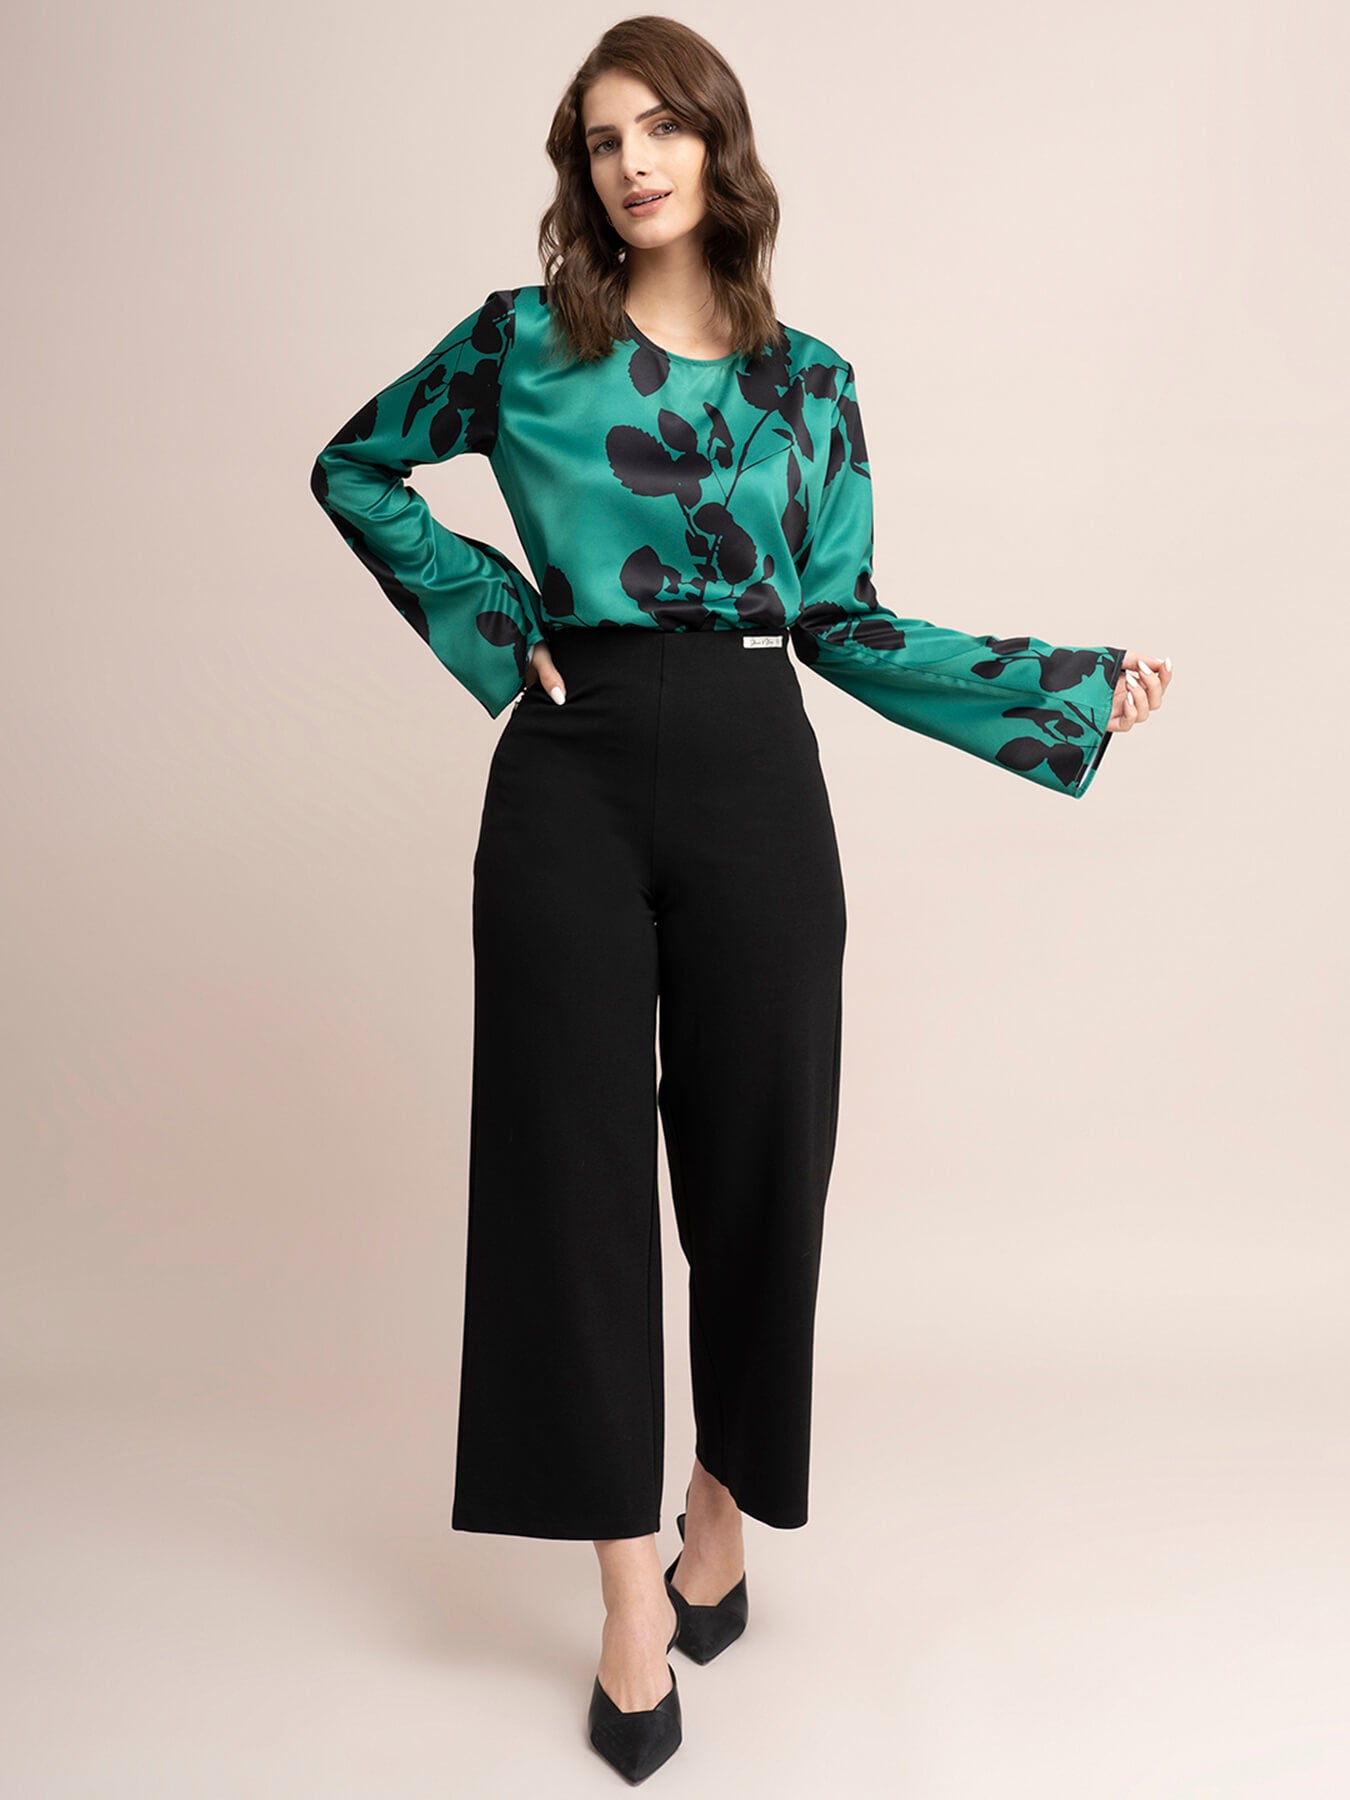 Satin Bell Sleeve Top - Green And Black